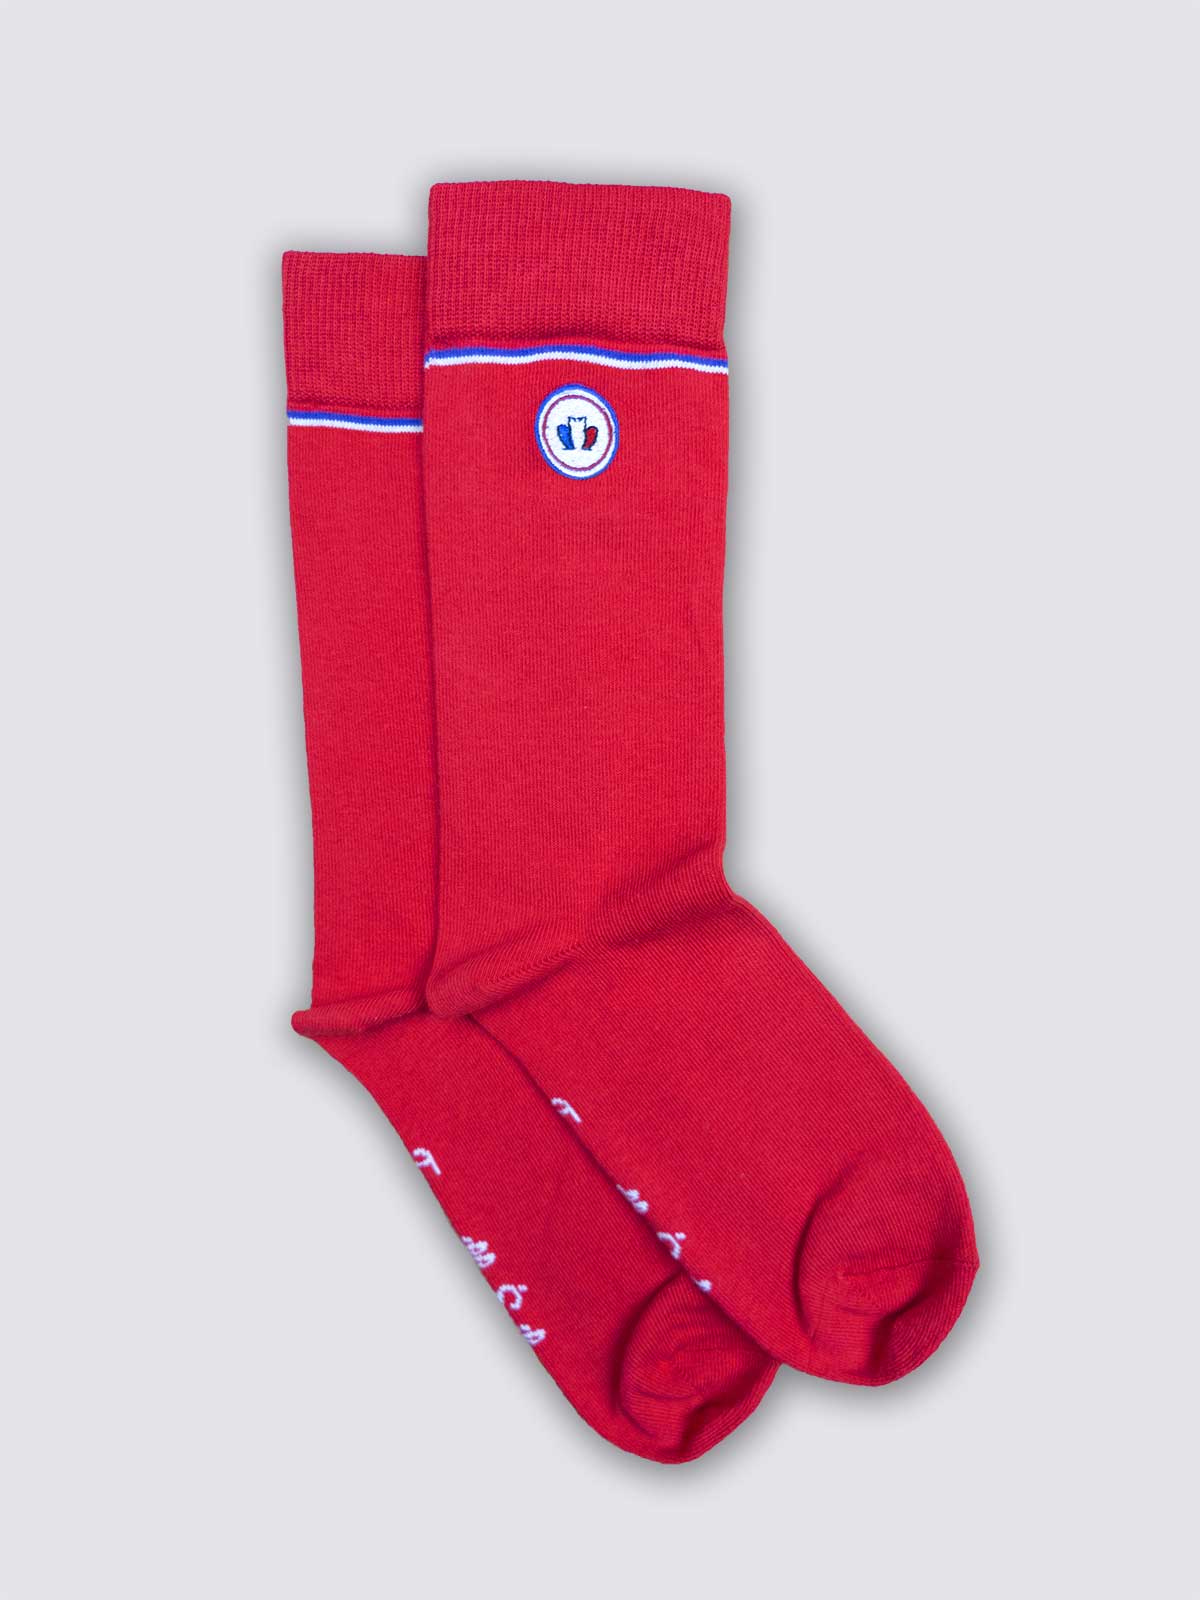 chaussettes-made-in-france-les-unies-rouge-vif-1